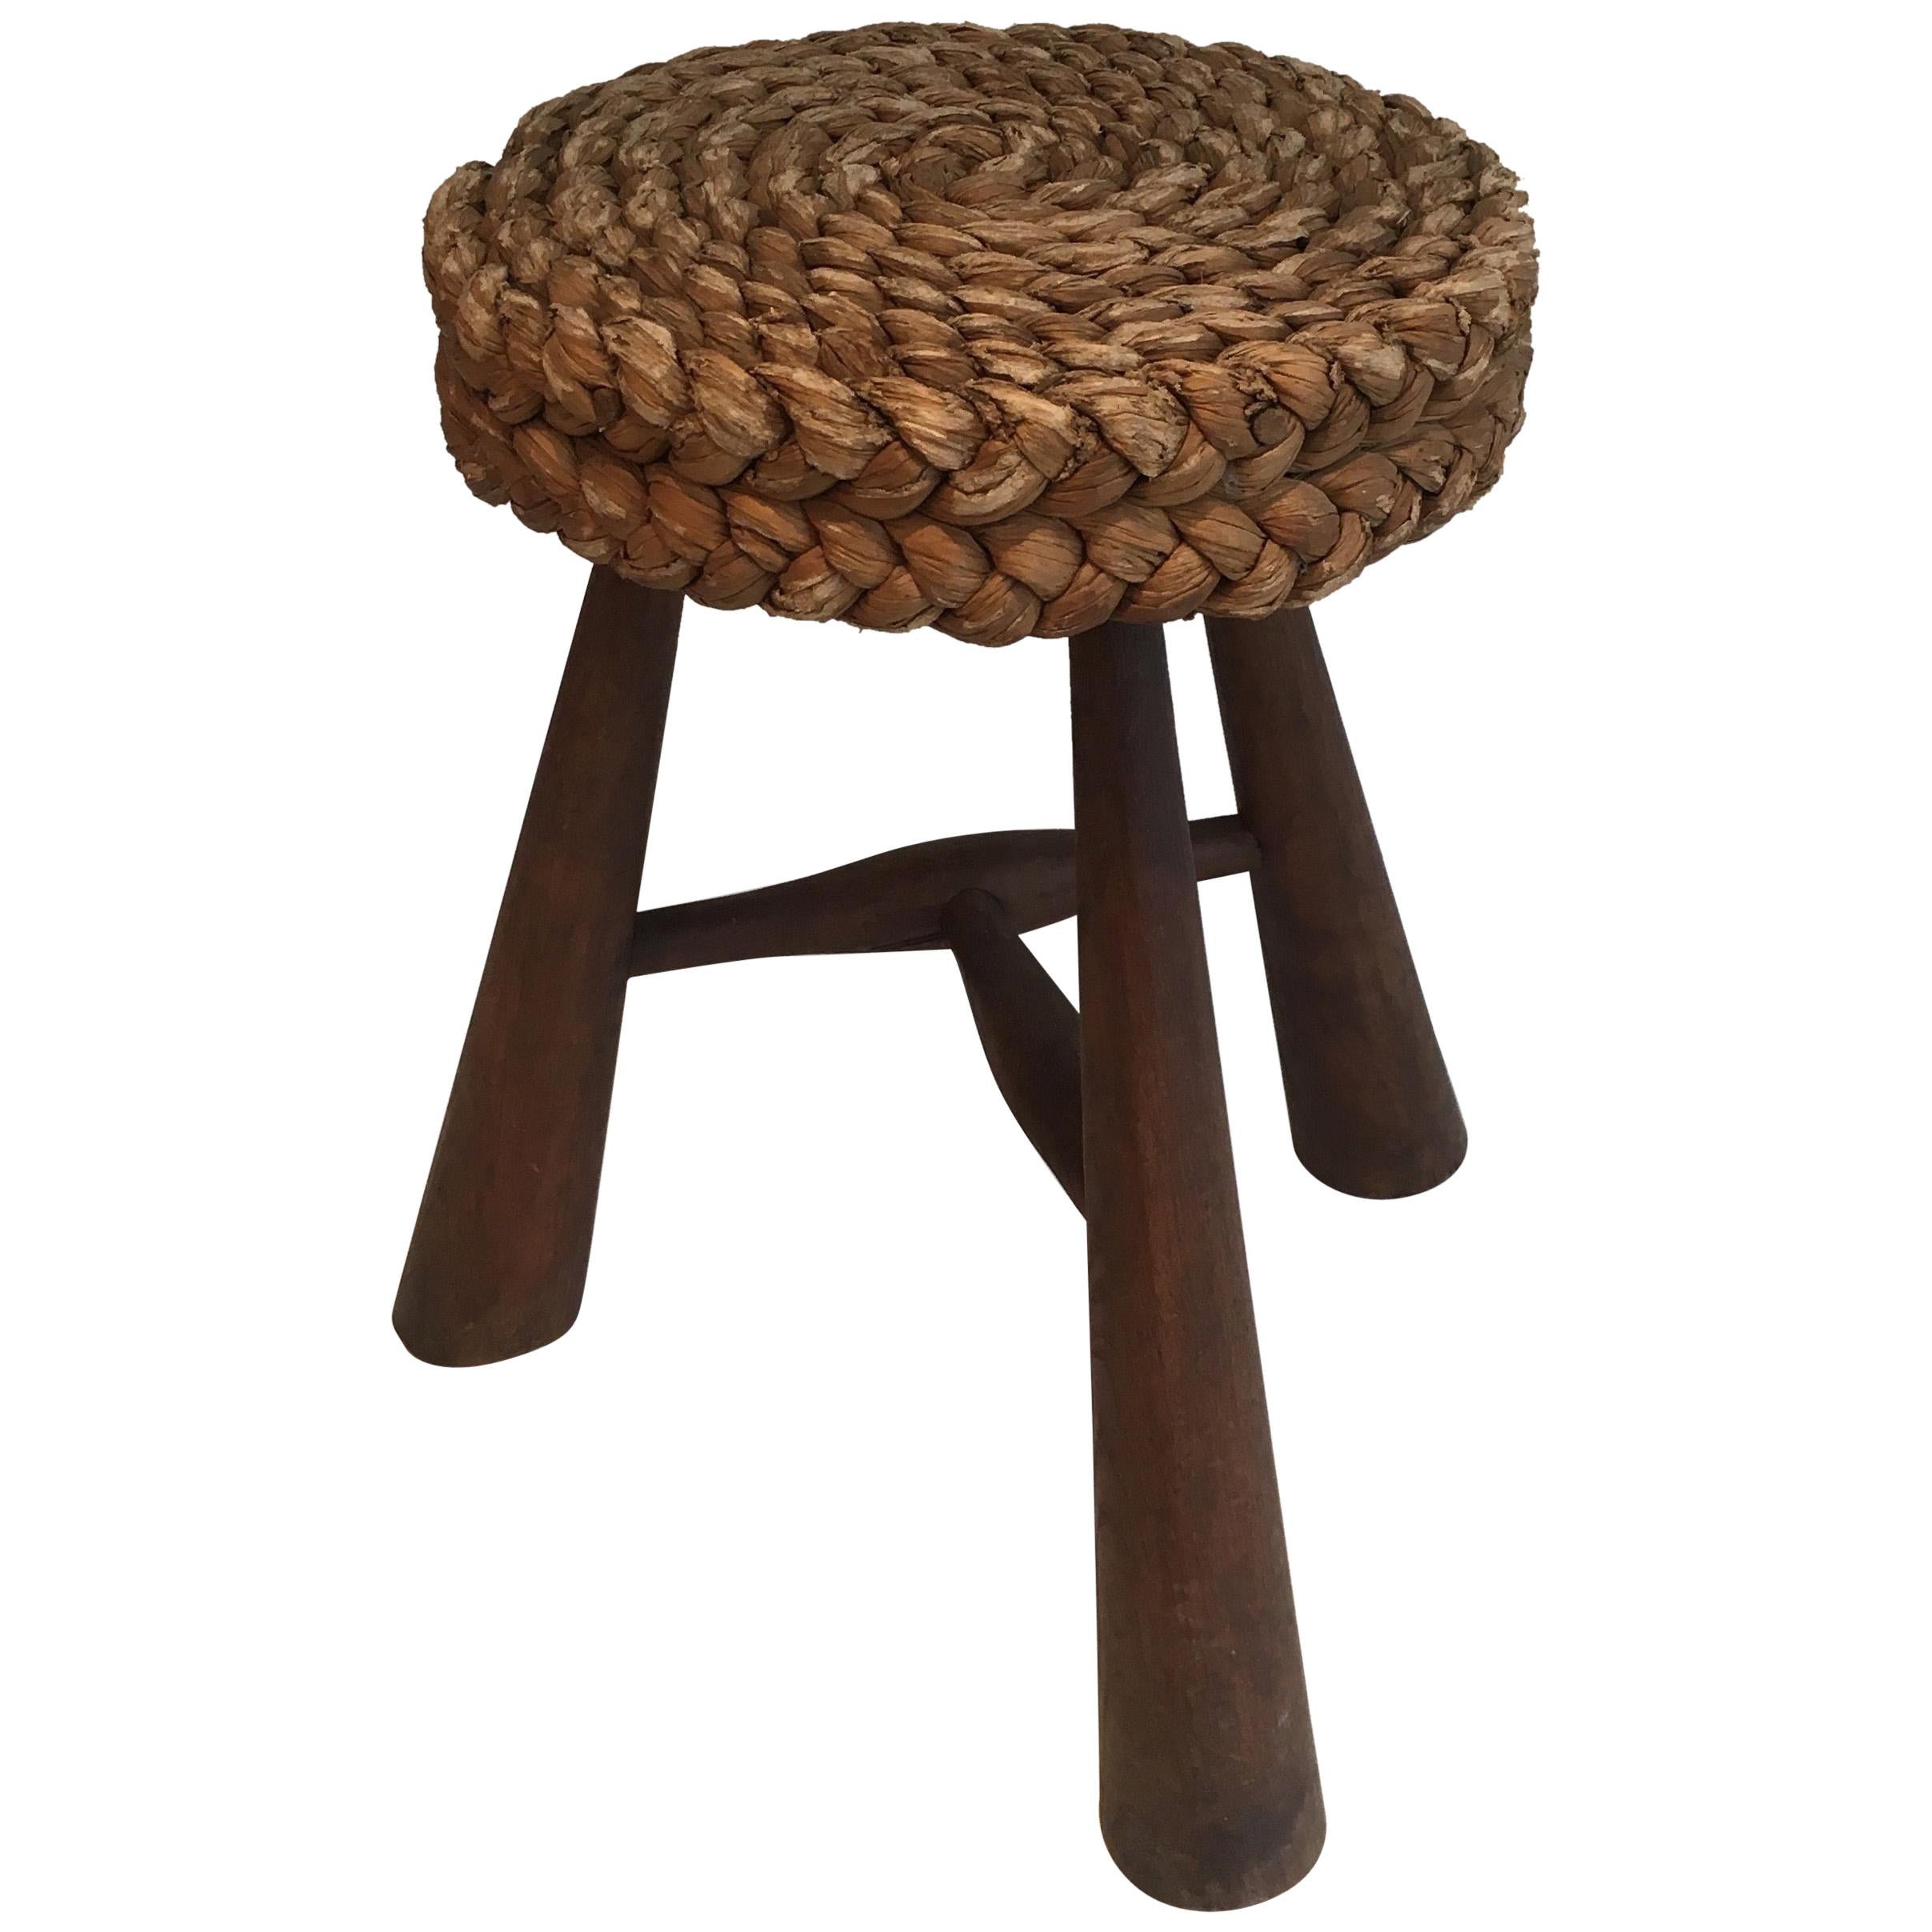 Audoux Minet. Wood and rope stool, French, circa 1950.
     